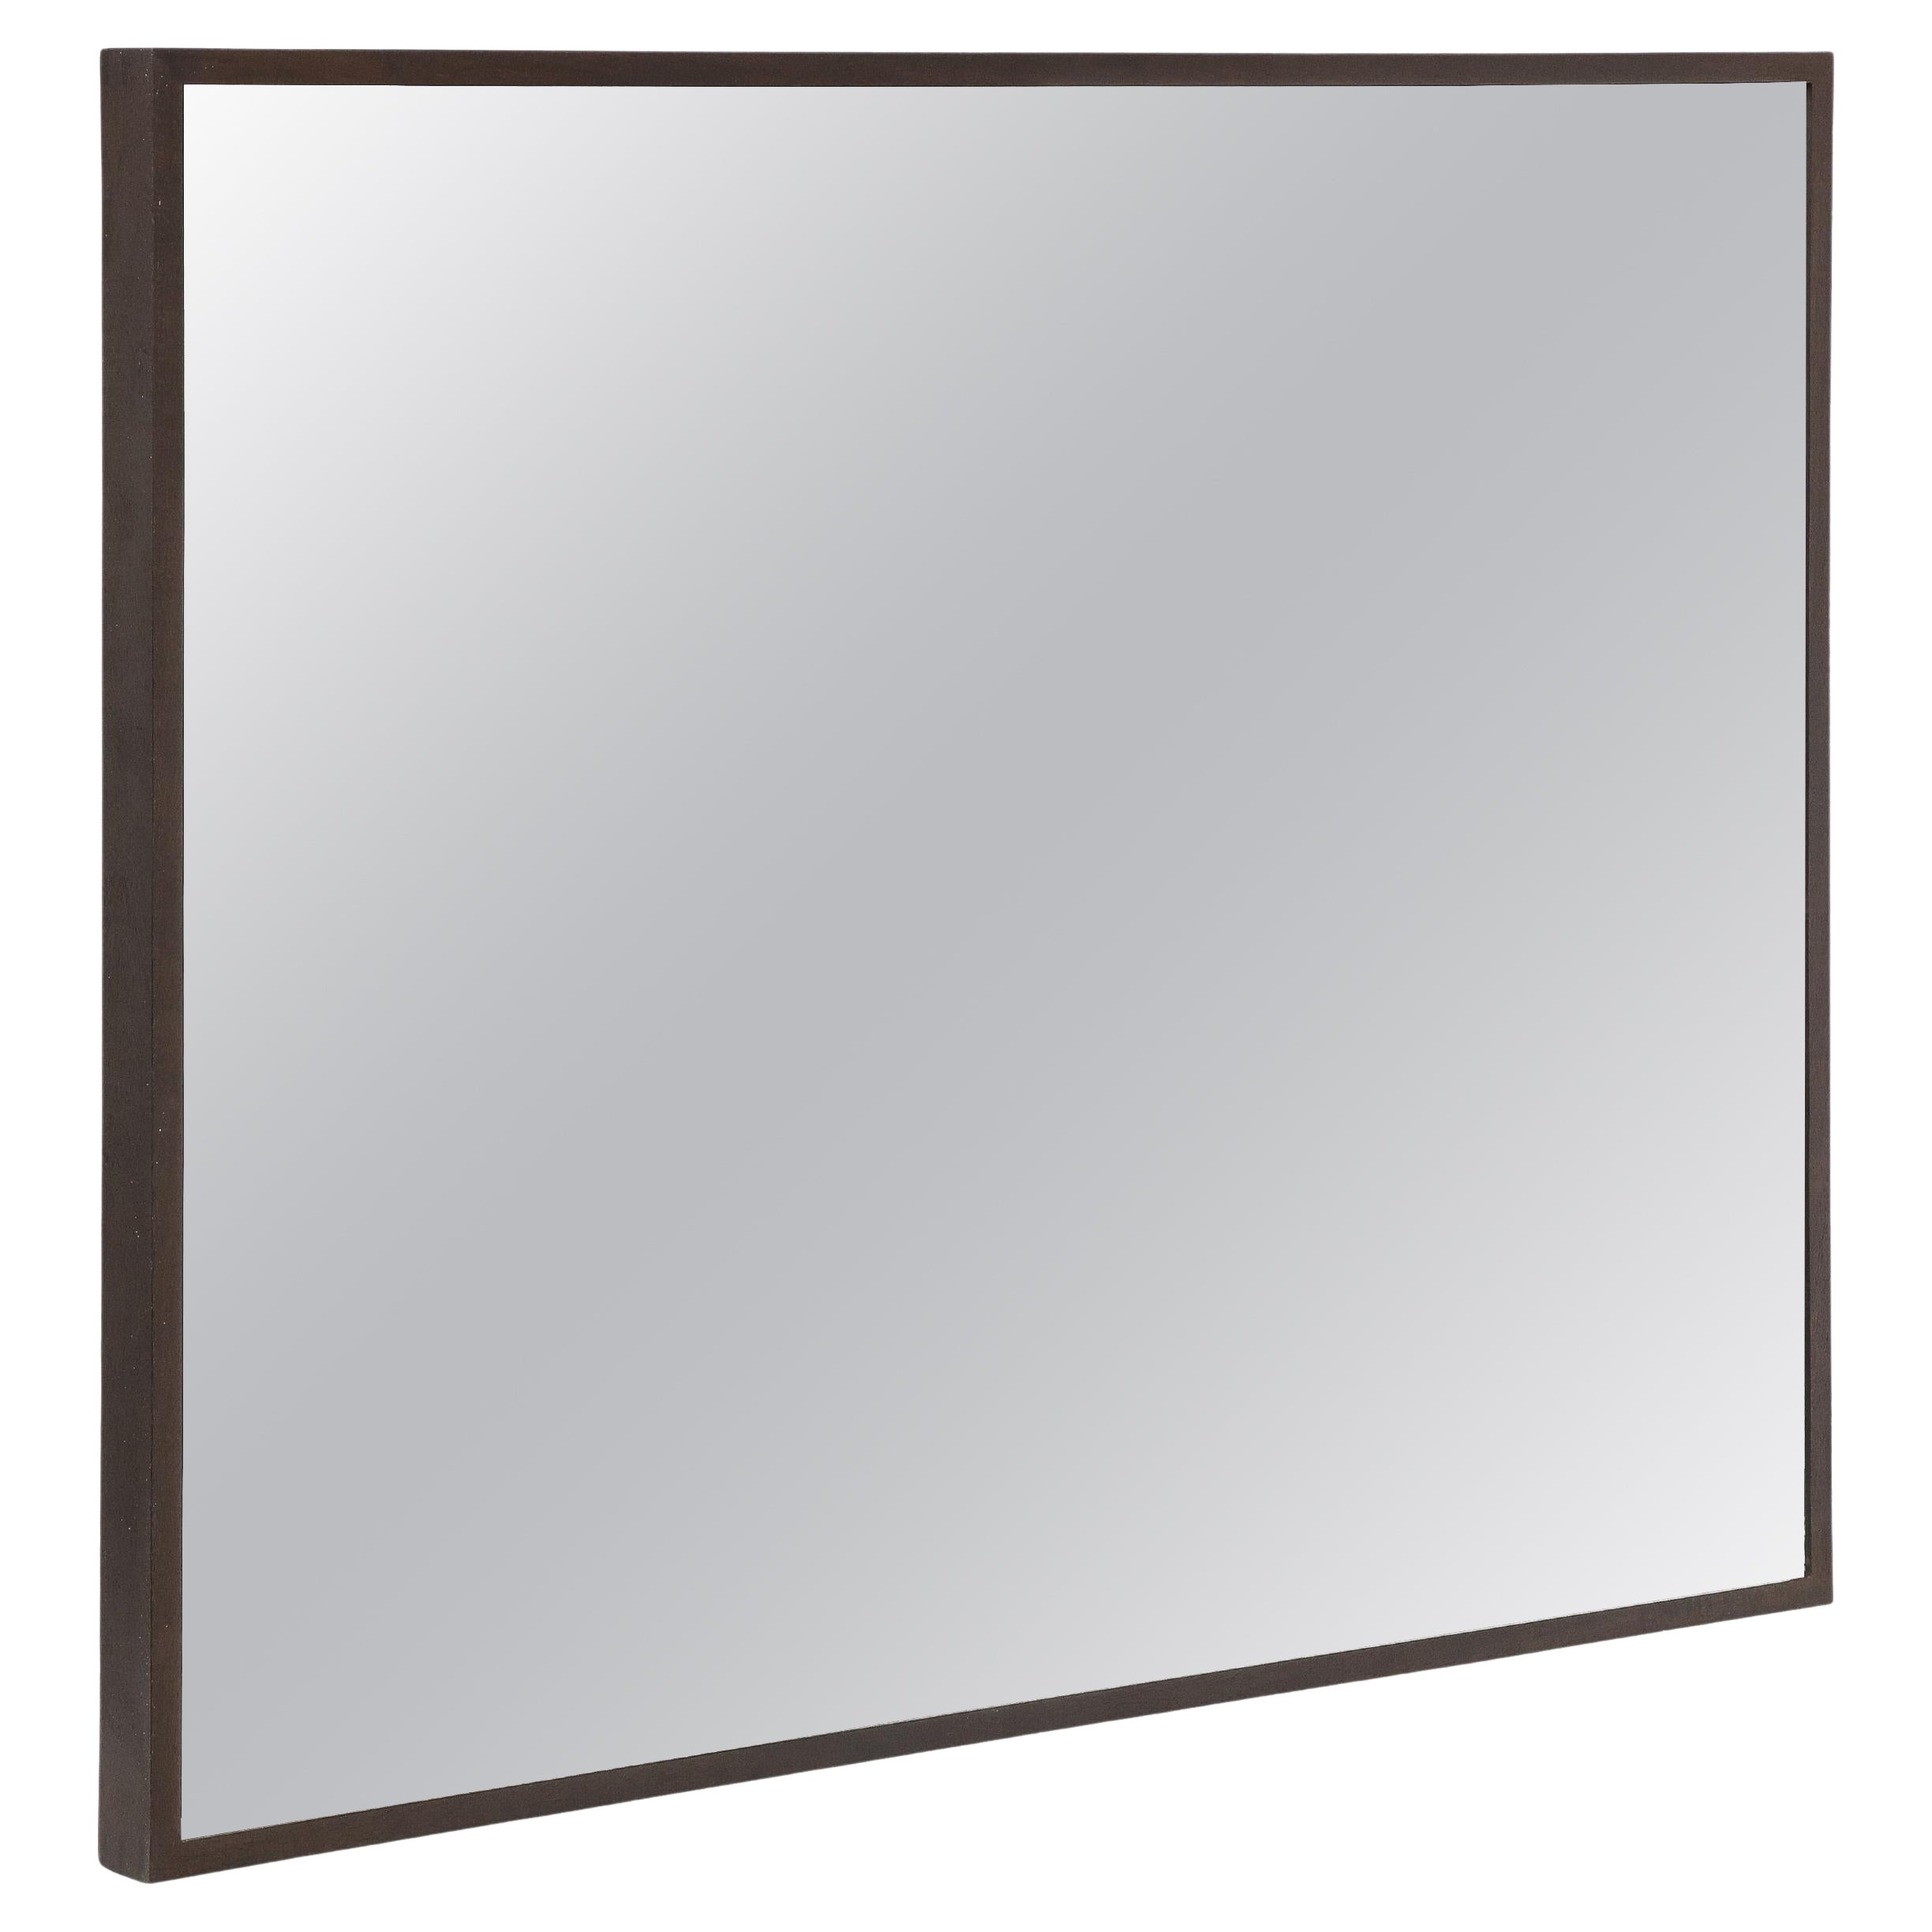 Black Stained Oak Wall Mirror, Contemporary For Sale